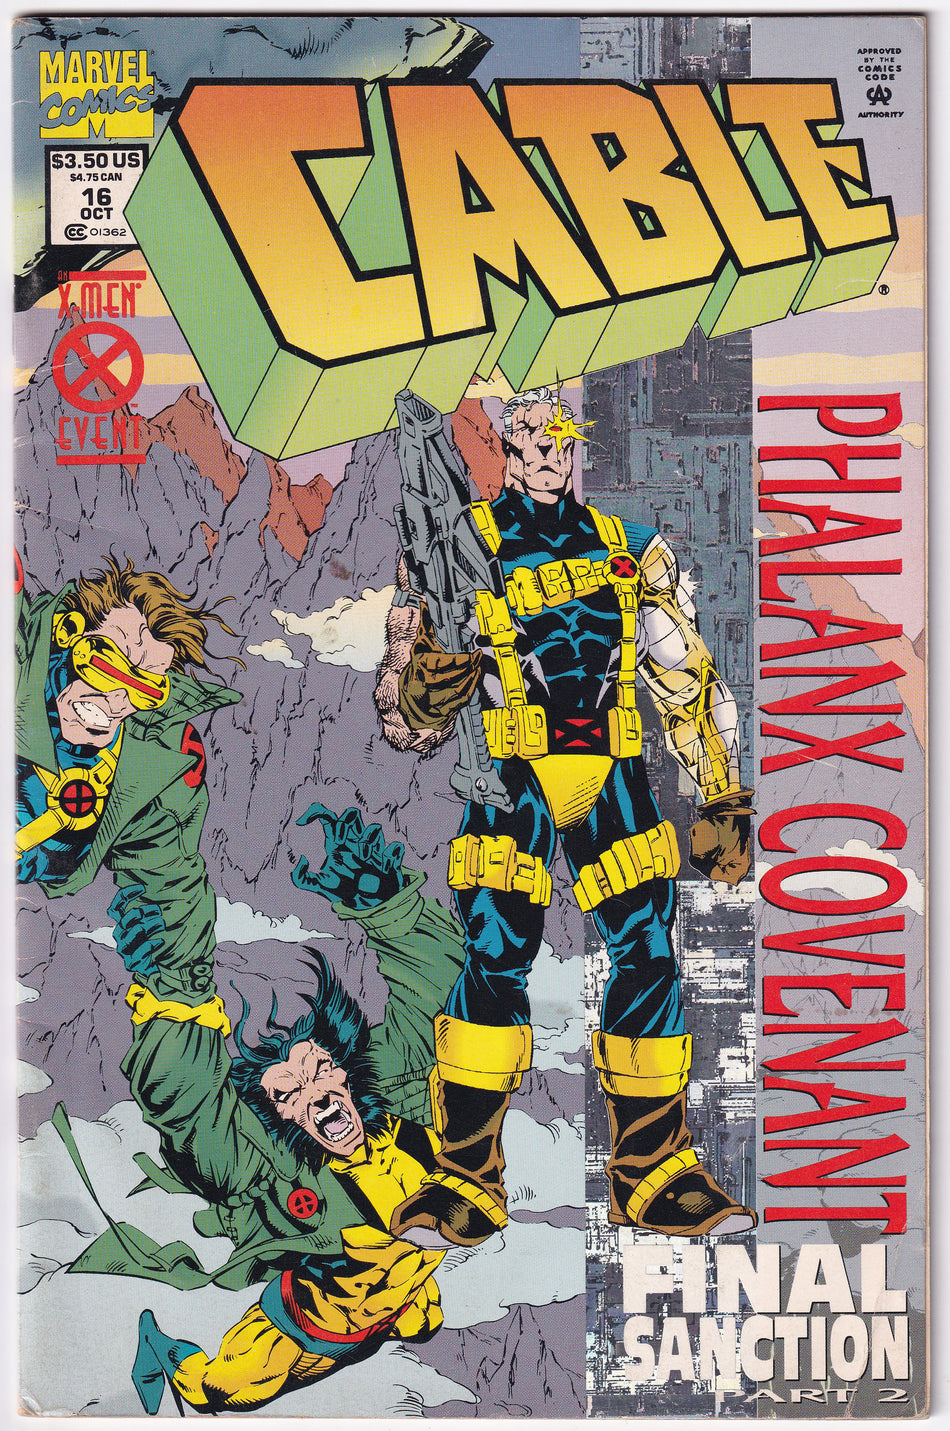 Photo of Cable V1 (94) 16B Retail Edition Larry Hama, Steve Skroce, Mike Sellers Comic sold by Stronghold Collectibles